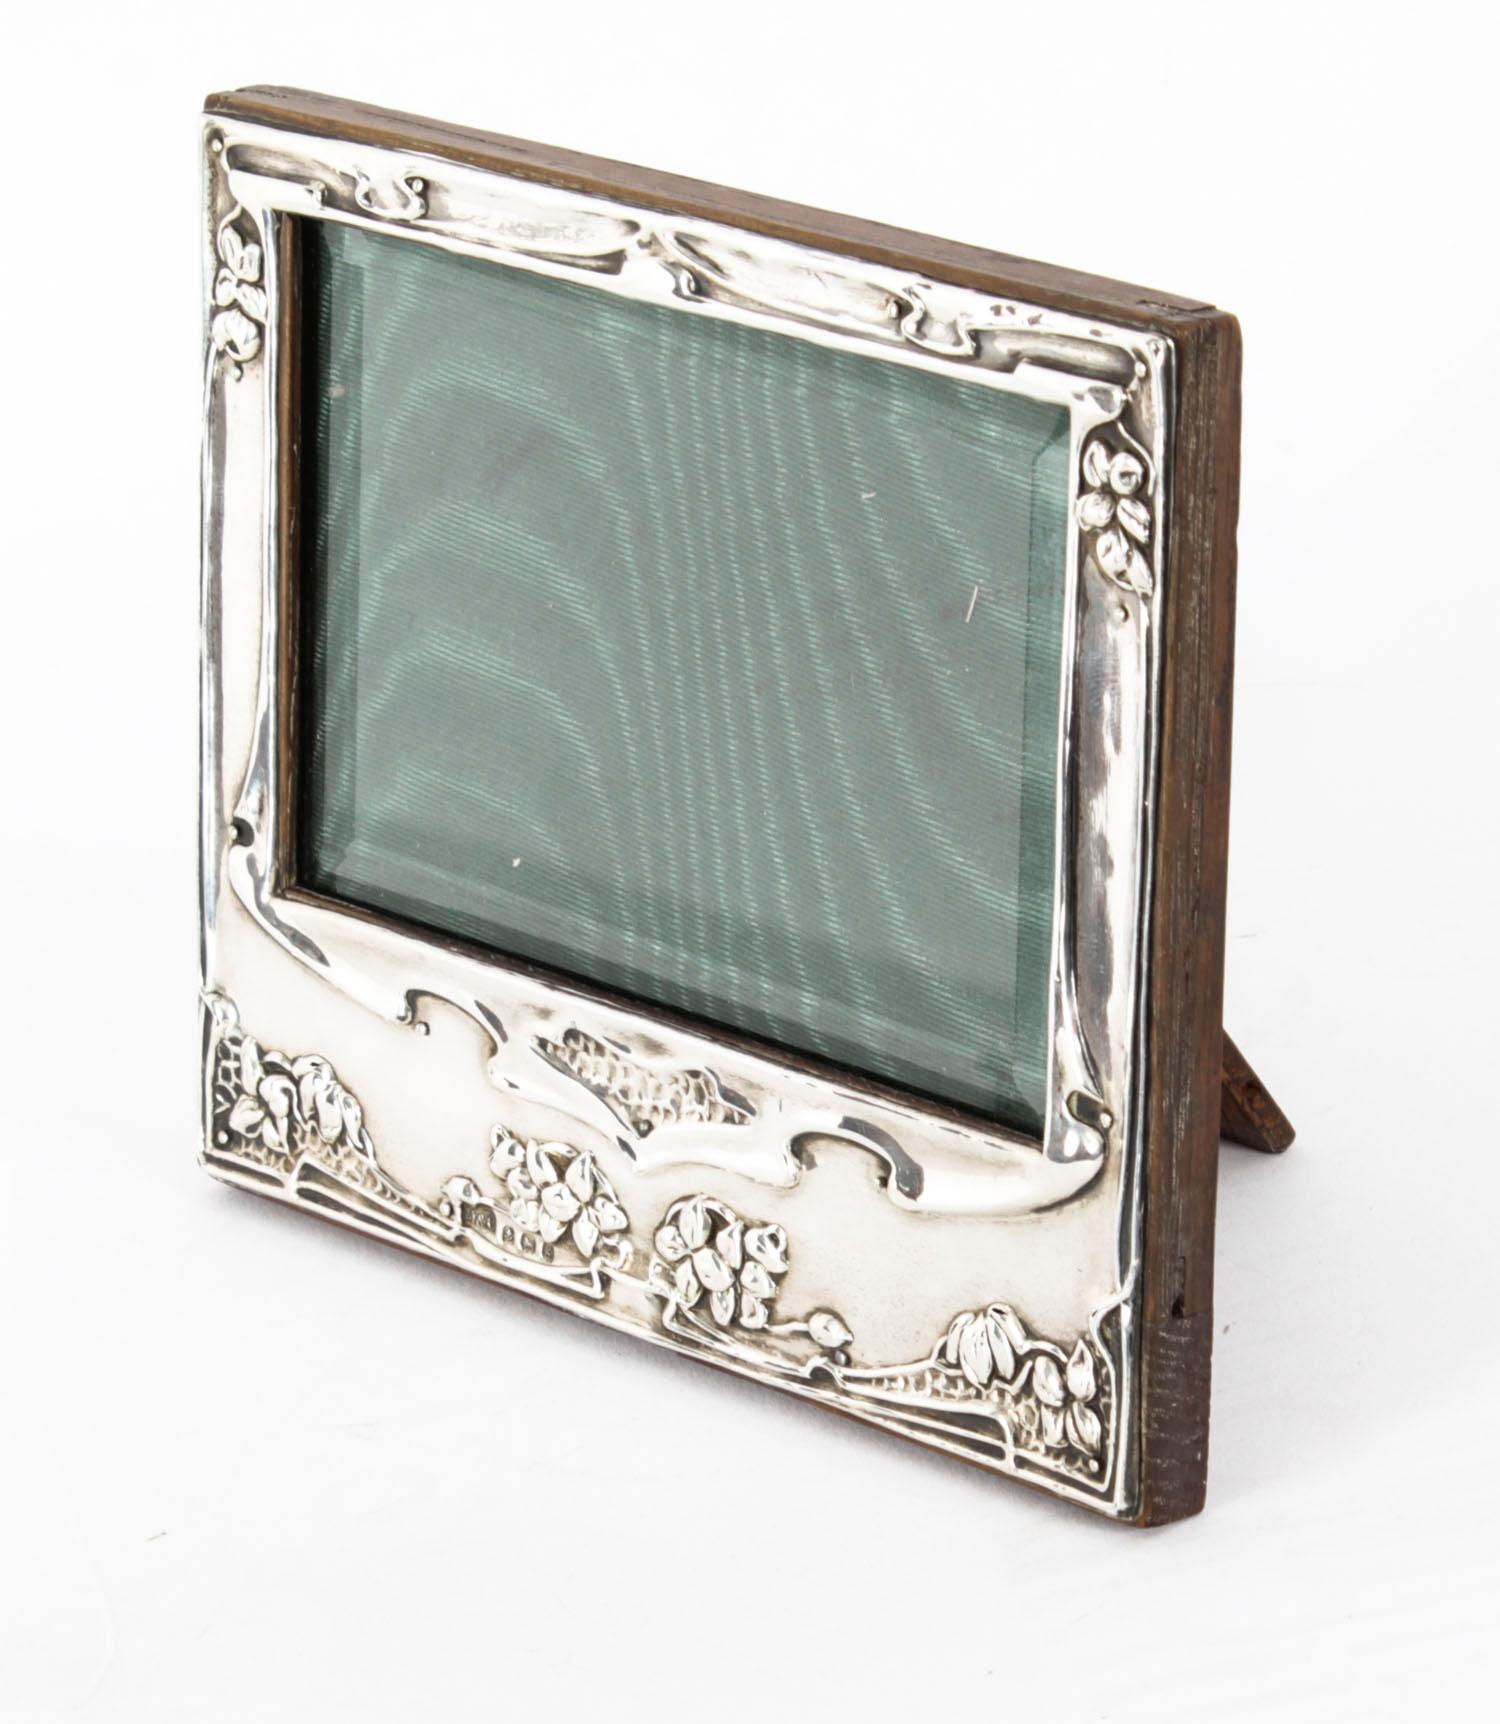 Early 20th Century Antique Art Nouveau Sterling Silver Photo Frame dated 1906 13x16cm